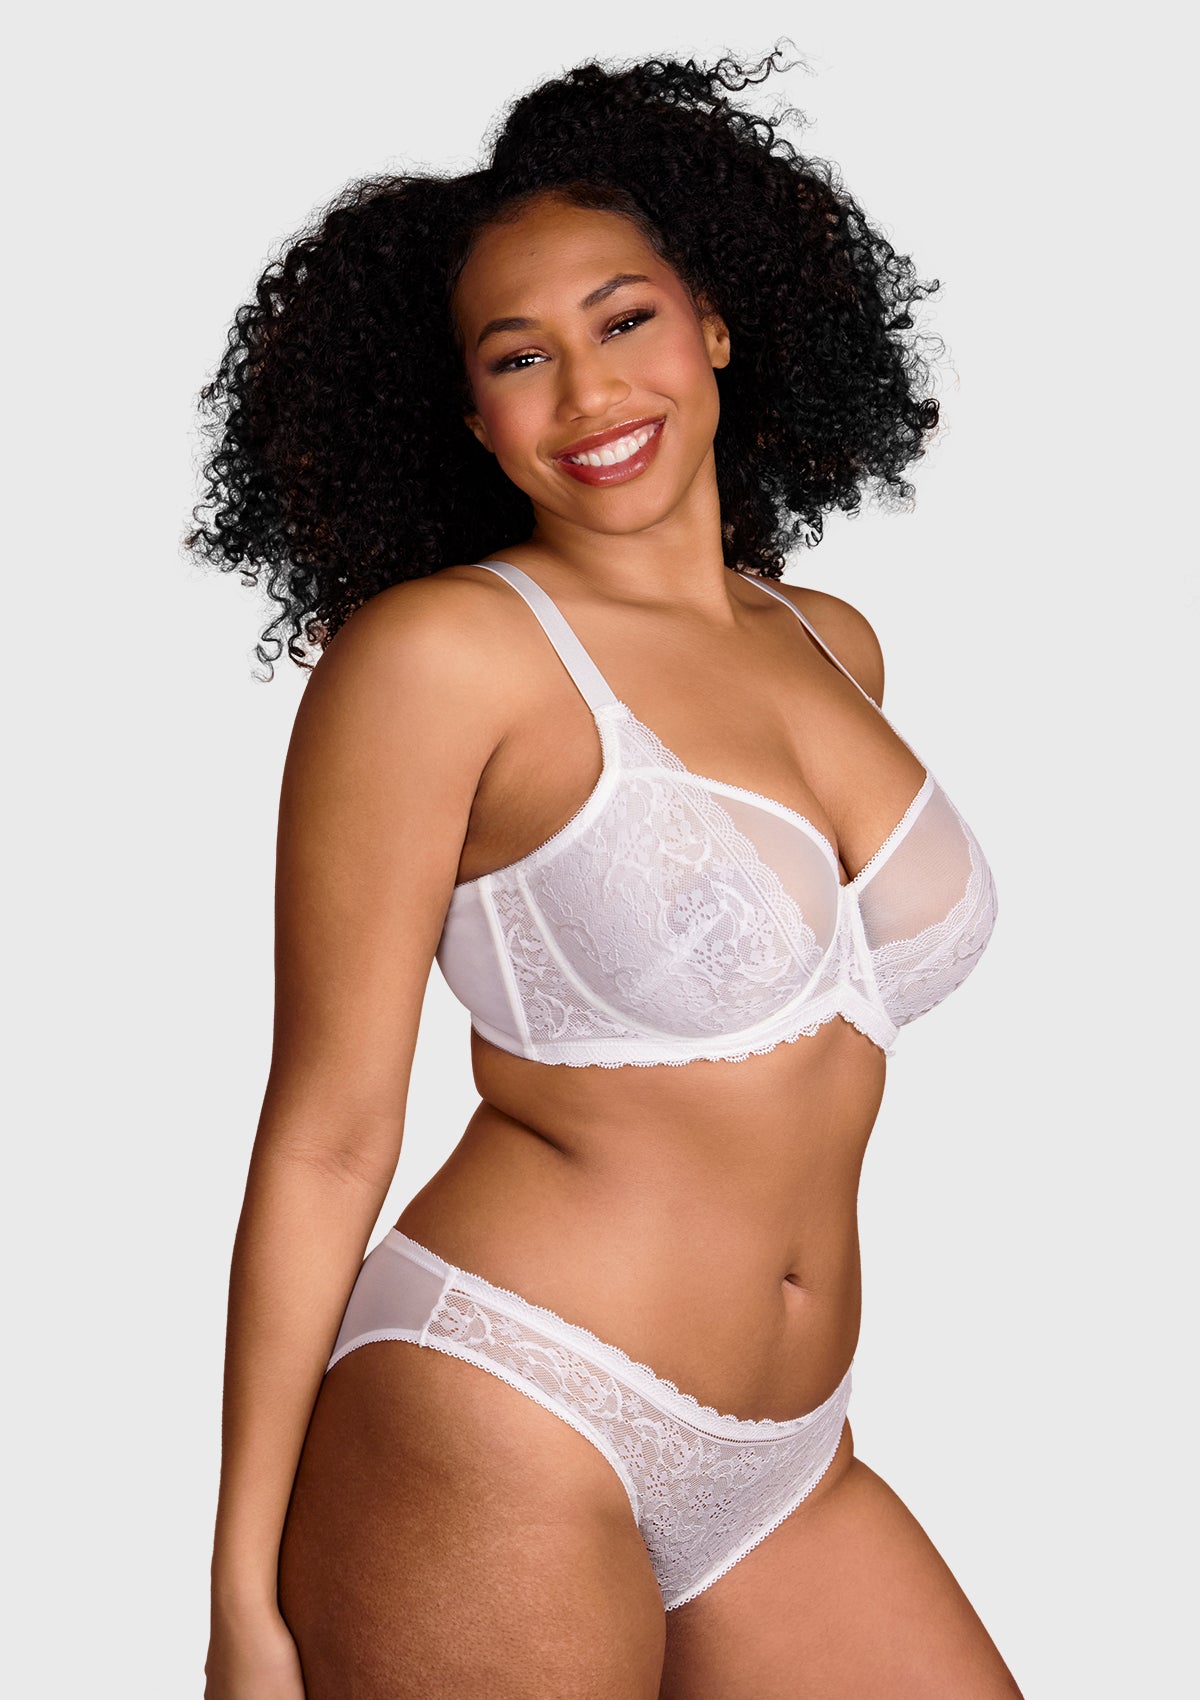 HSIA Anemone Big Bra: Best Bra For Lift And Support, Floral Bra - White / 36 / DDD/F